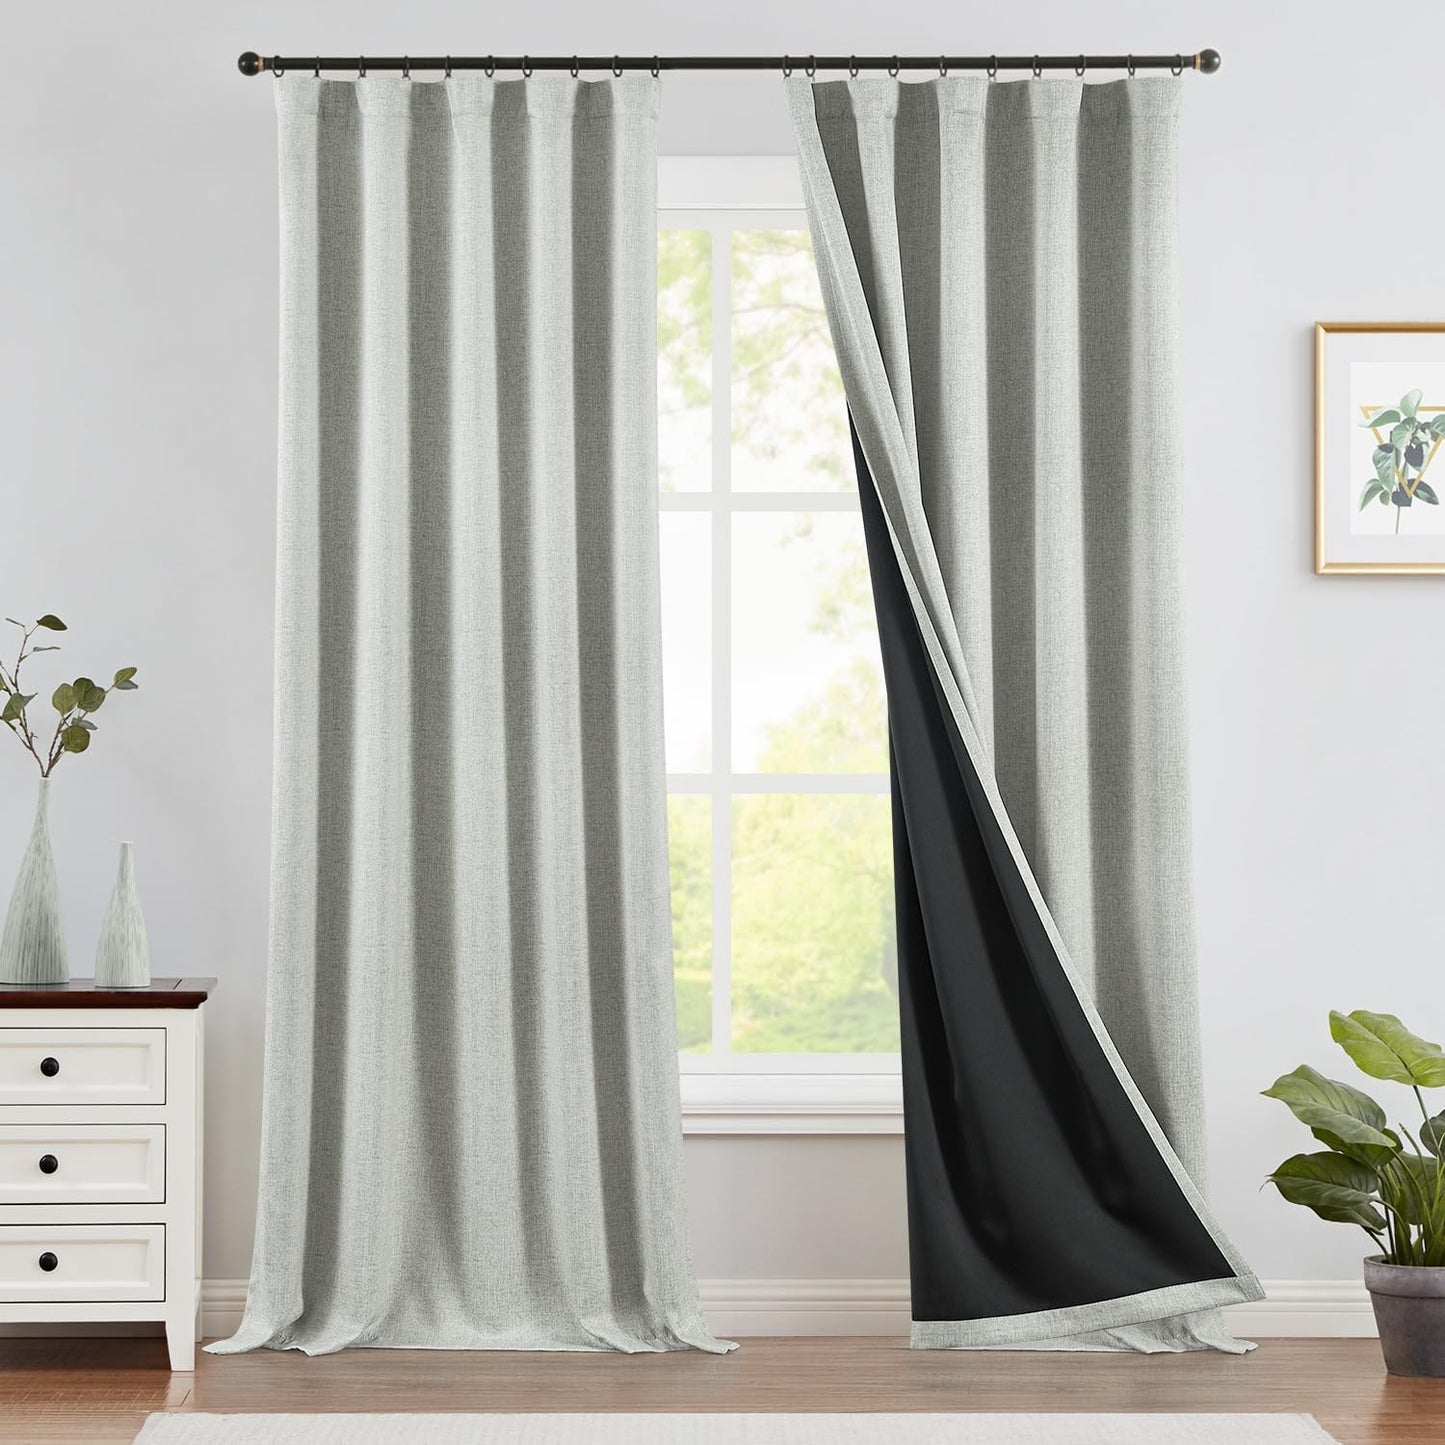 JINCHAN 100% Blackout Curtains for Bedroom, 90 Inch Length Linen Textured Drapes for Living Room, Thermal Insulated Full Light Blocking Curtains, Grommet Top Window Treatments 2 Panels Heathered White  CKNY HOME FASHION Smooth | Grey 96"L 